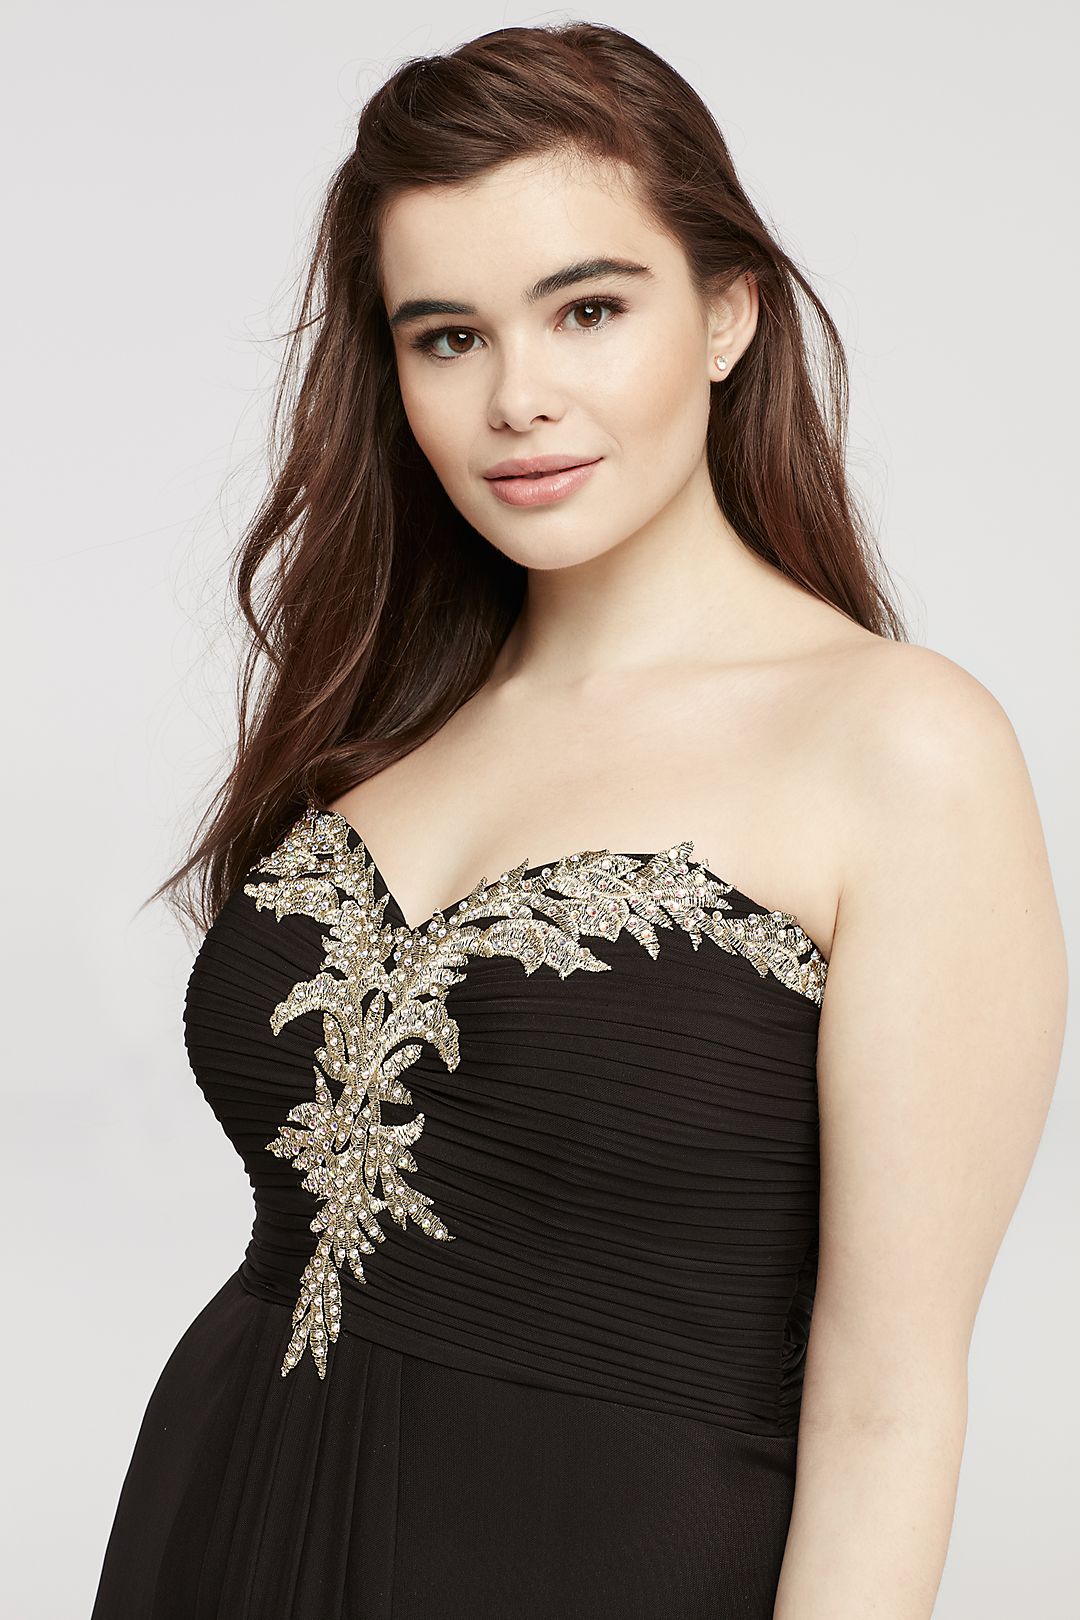 Strapless Prom Dress with Embroidered Neckline Image 2